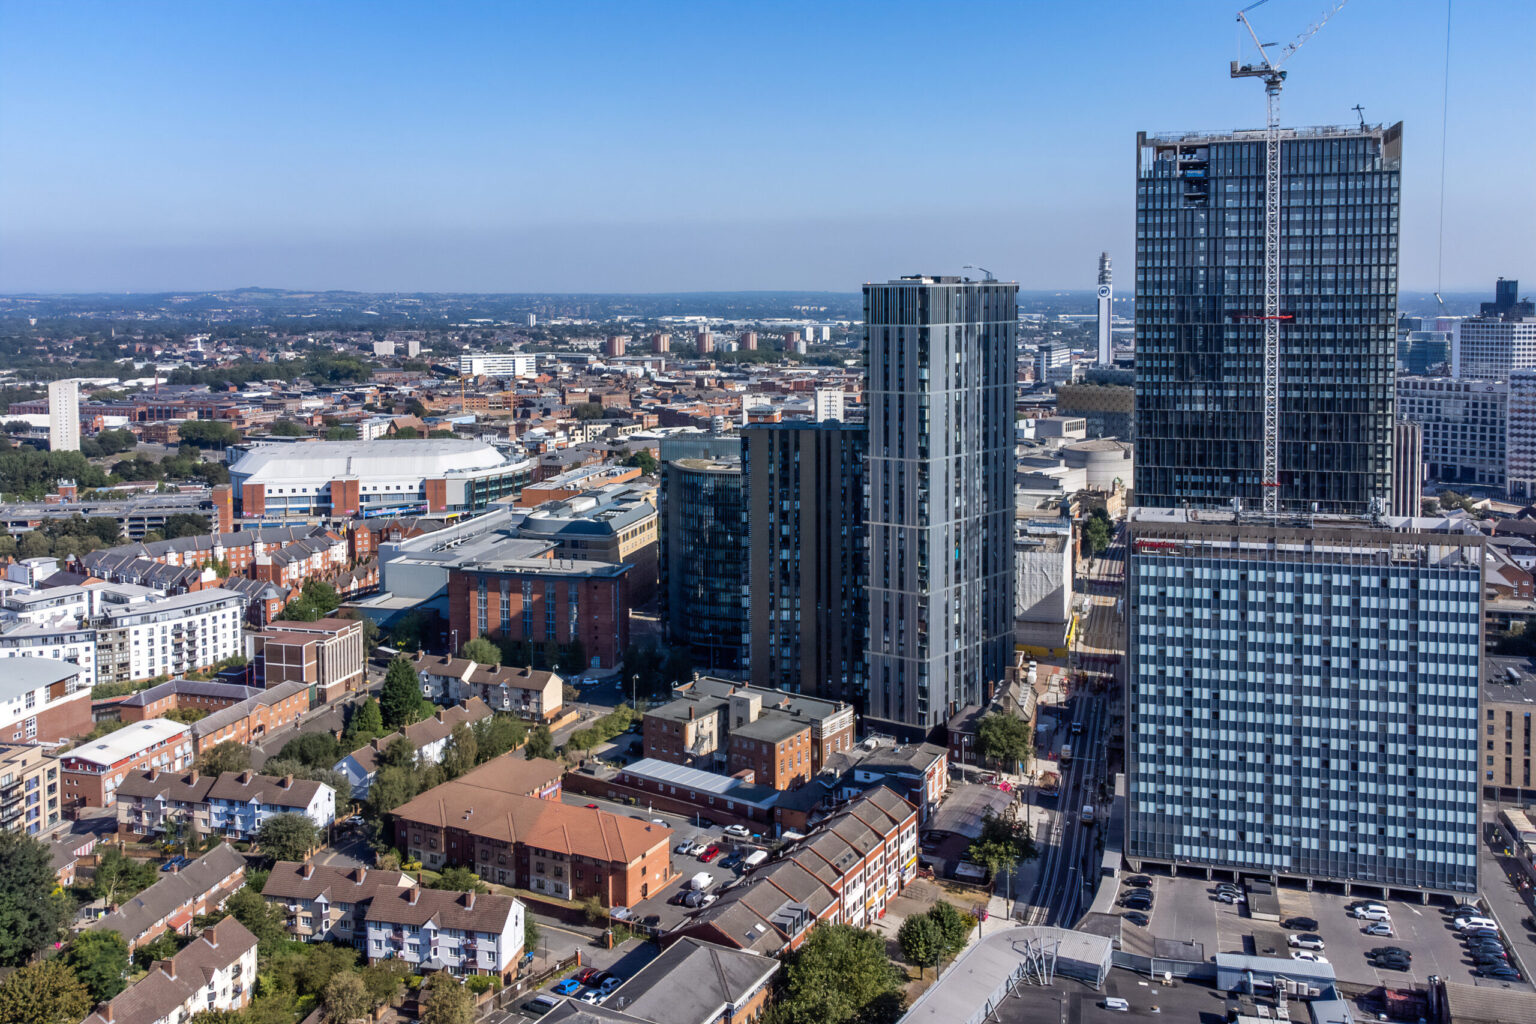 Aerial view of The Bank apartment blocks in Broad Street, Birmingham, managed by KWB Residential